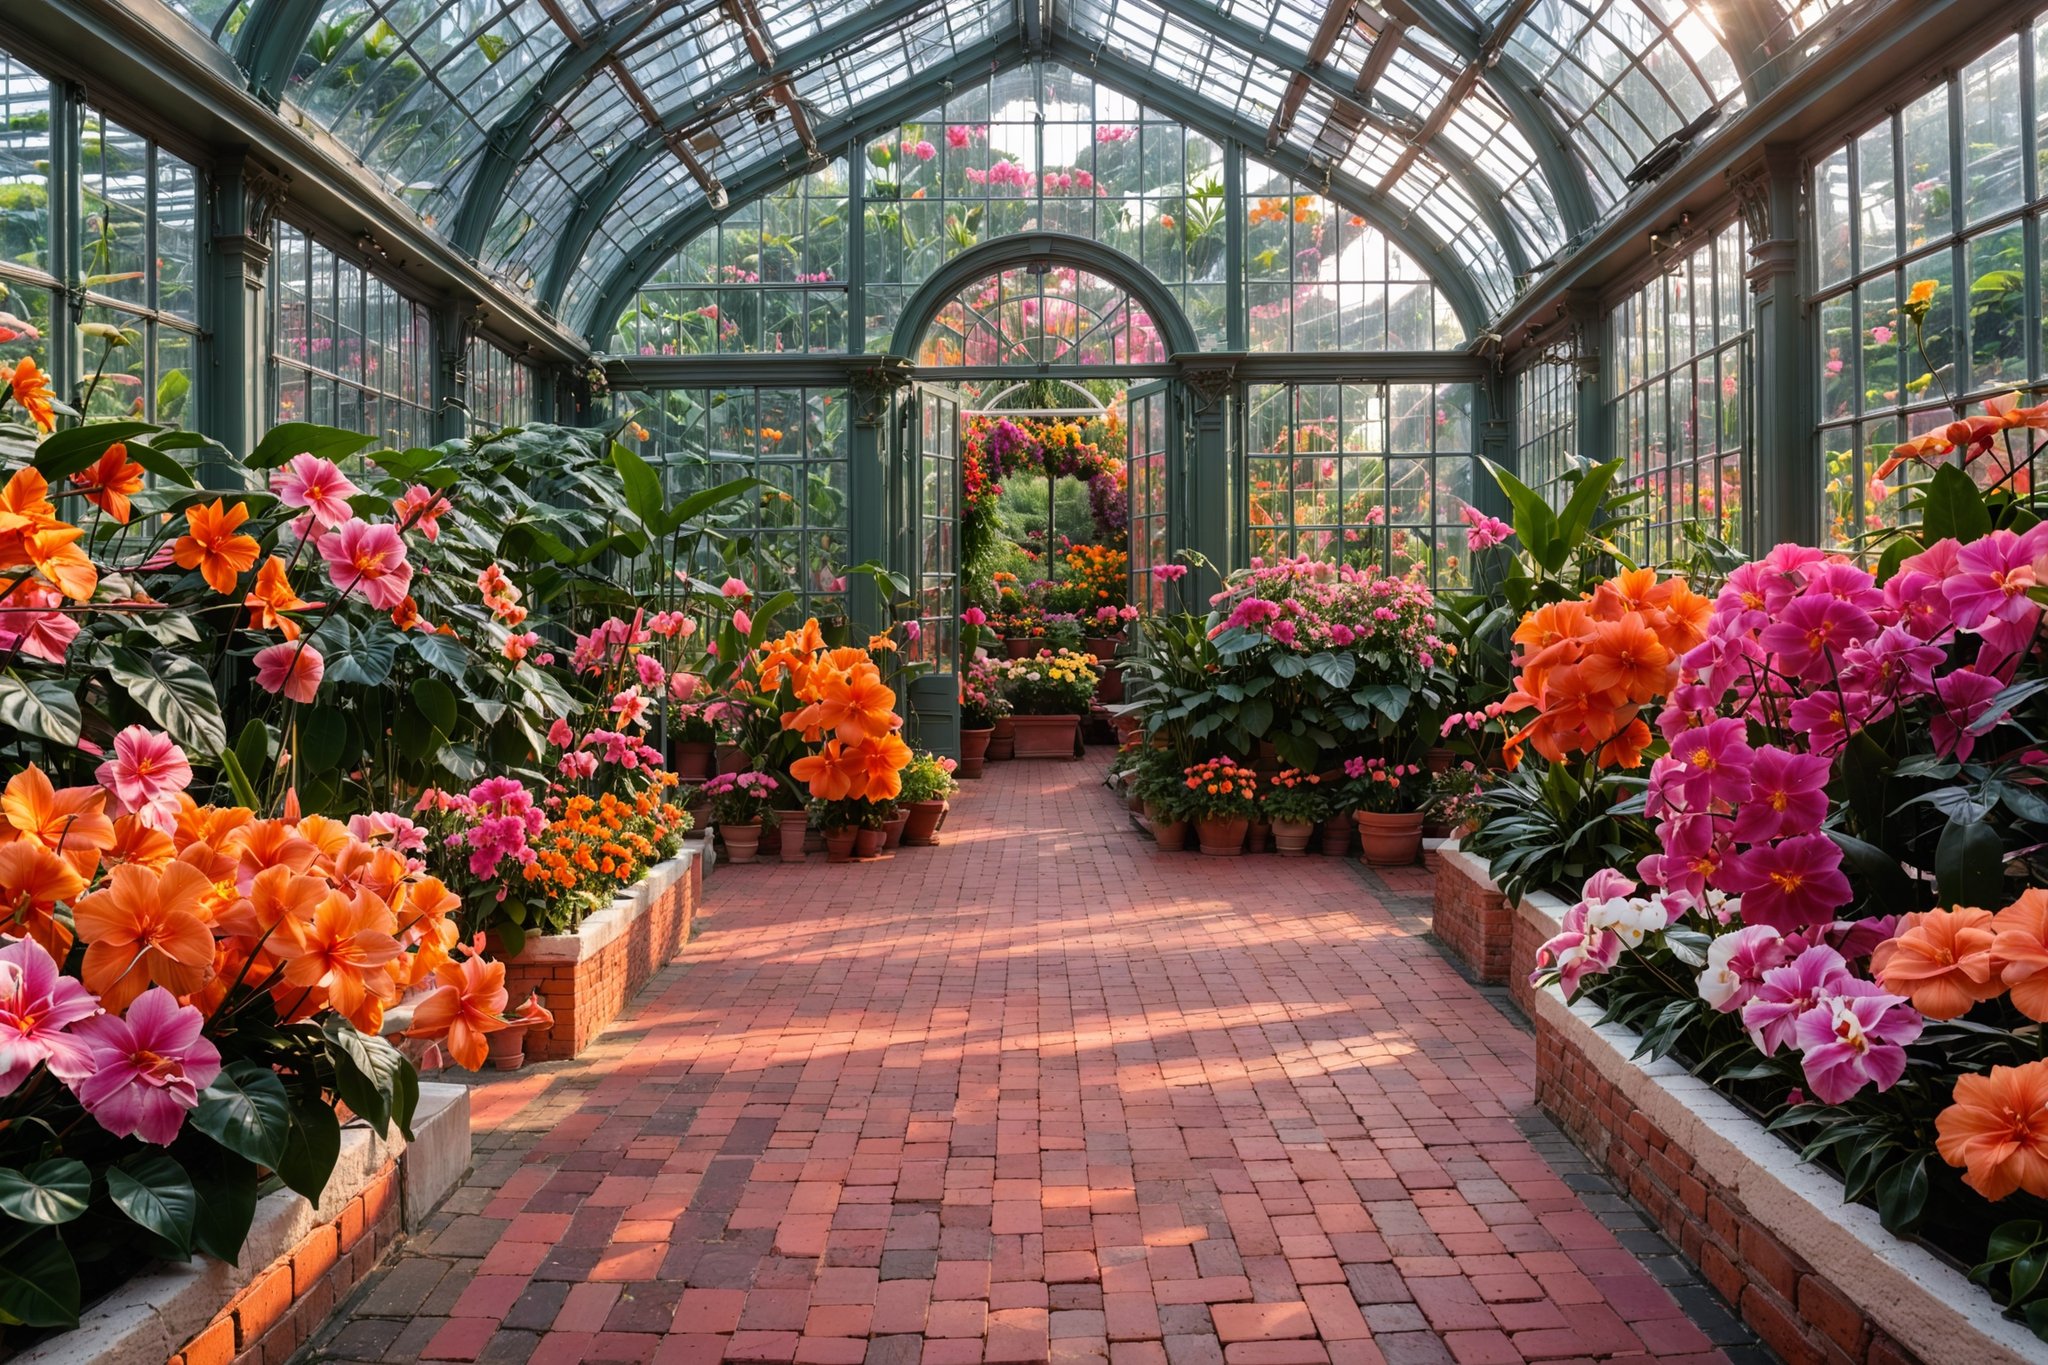 A beautifully designed greenhouse with a glass ceiling and walls. The interior is adorned with a plethora of vibrant flowers, predominantly in shades of pink, orange, and red. The pathway in the center is made of brick, leading towards an arched entrance. Sunlight filters through the glass, casting a warm glow over the entire space. The overall ambiance is serene, inviting, and reminiscent of a tropical garden.